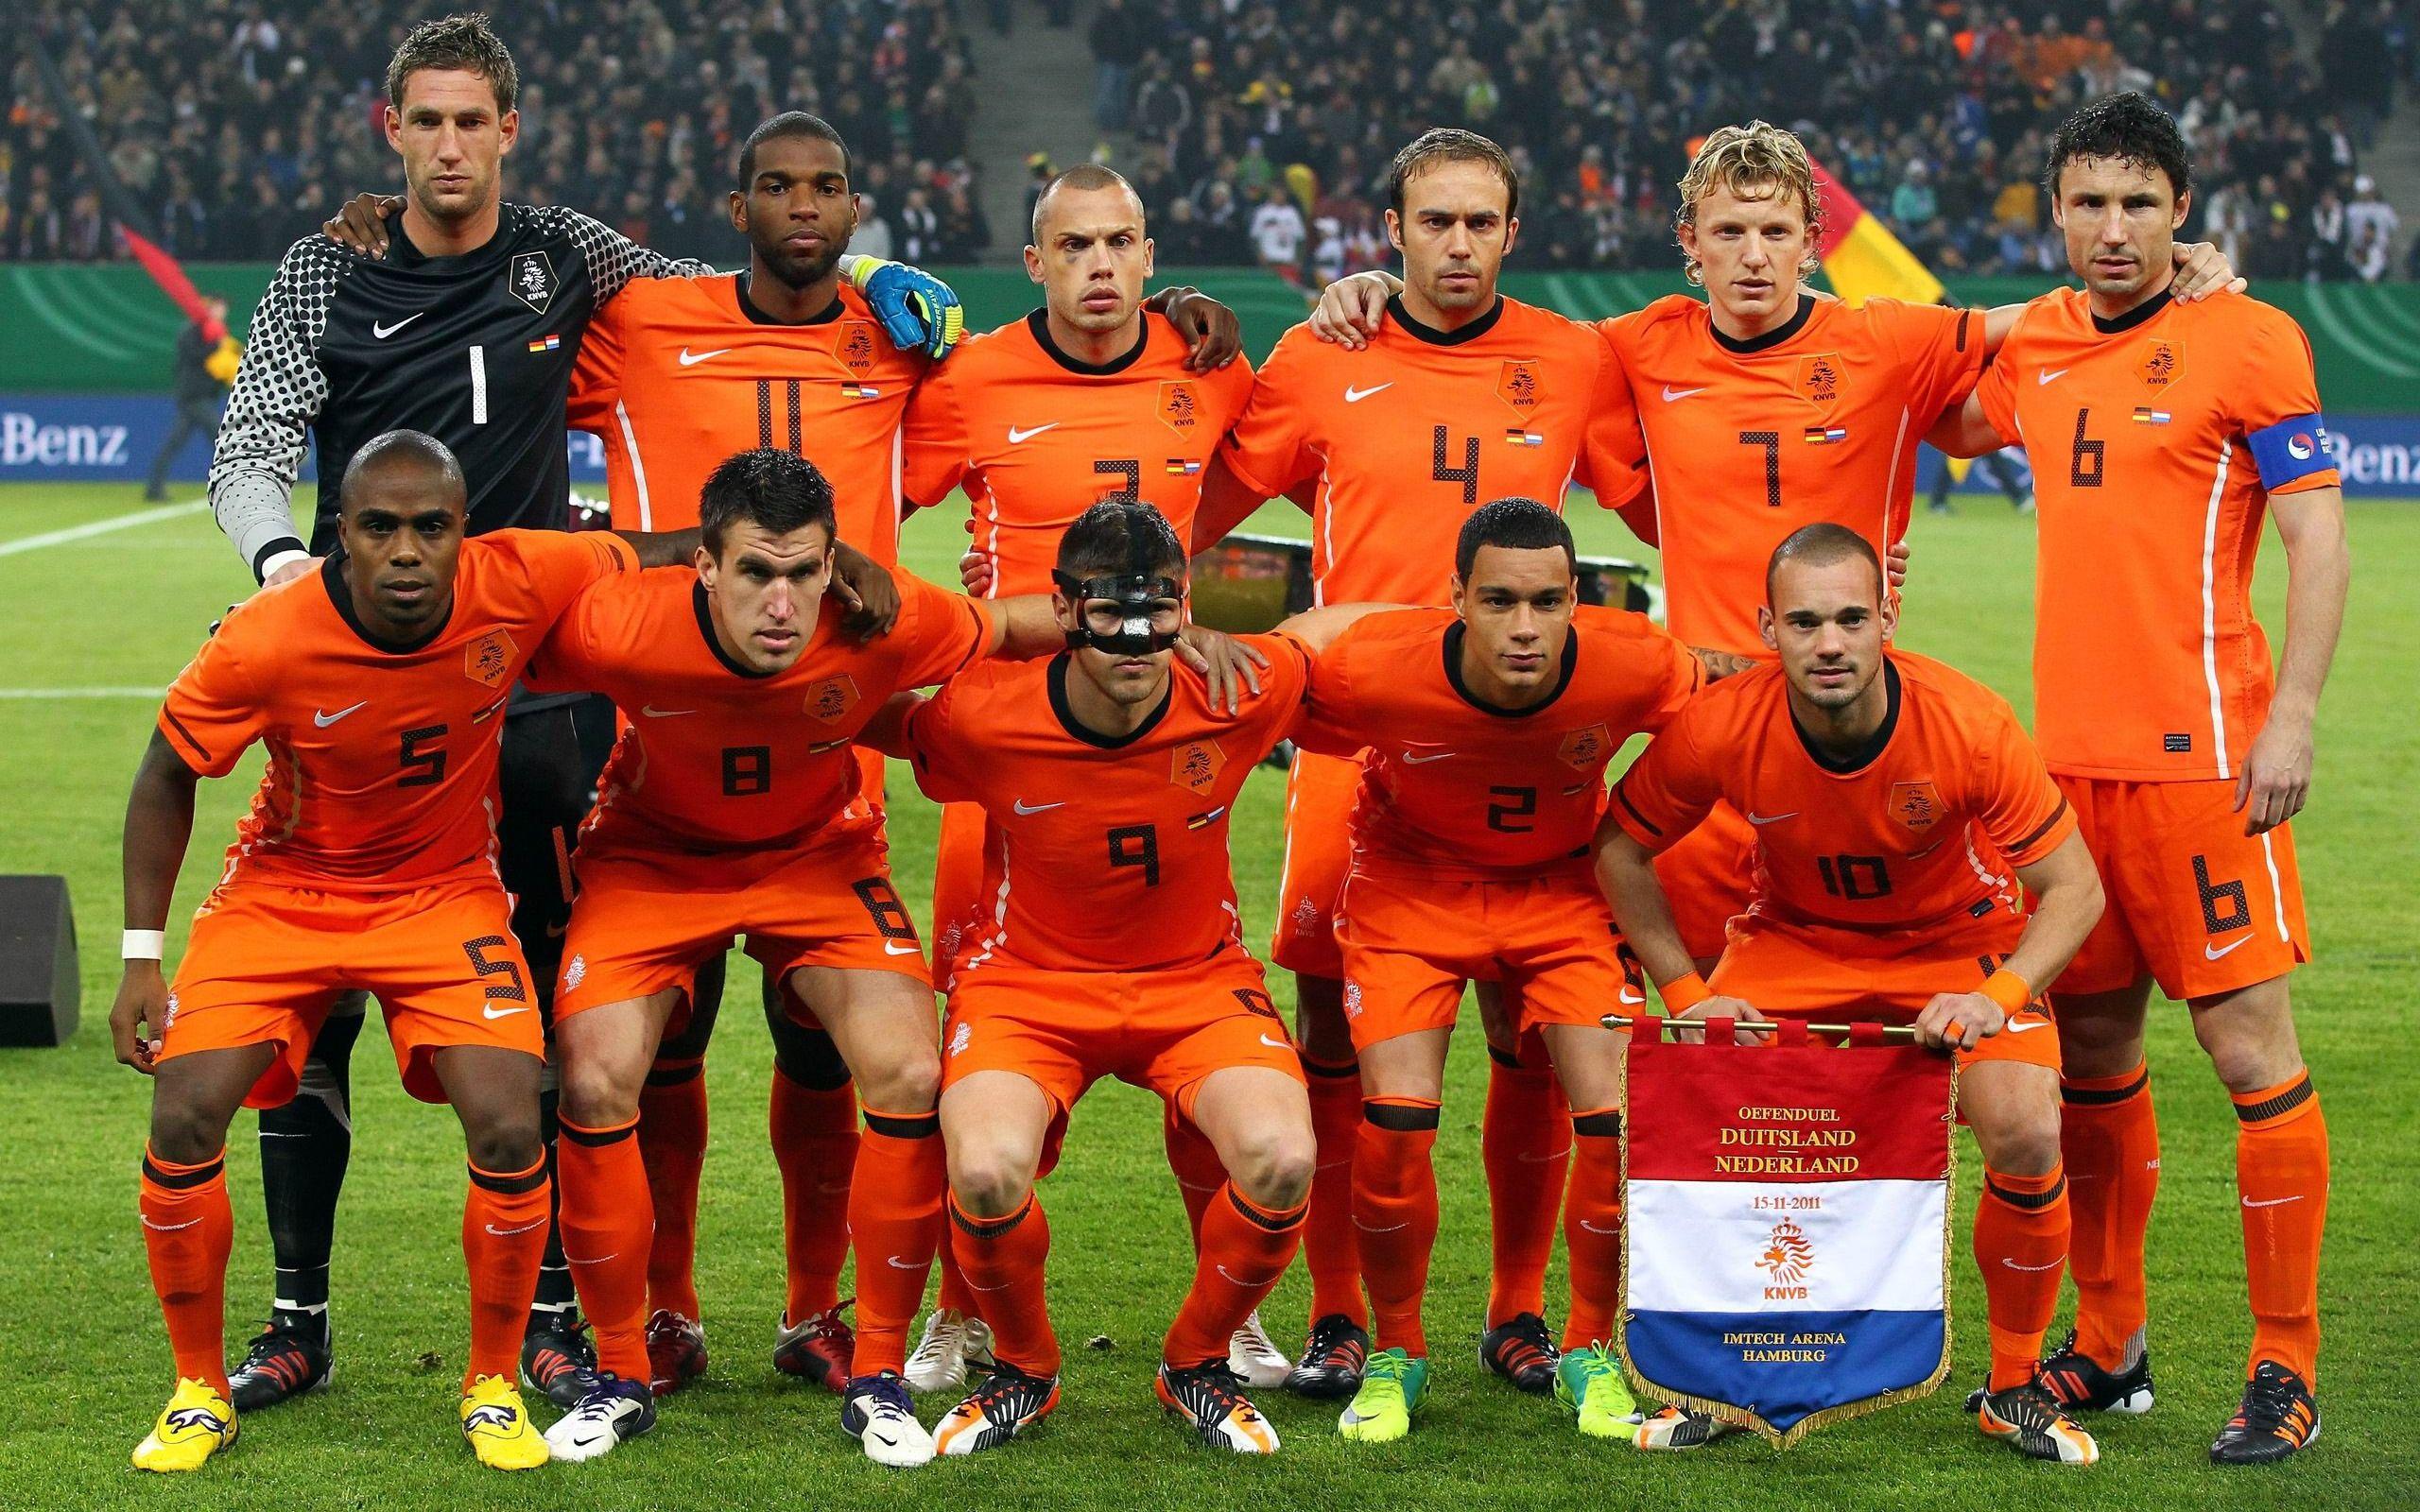  The image shows the starting lineup of the Netherlands national football team, wearing their orange jerseys, posing for a team photo before a match.